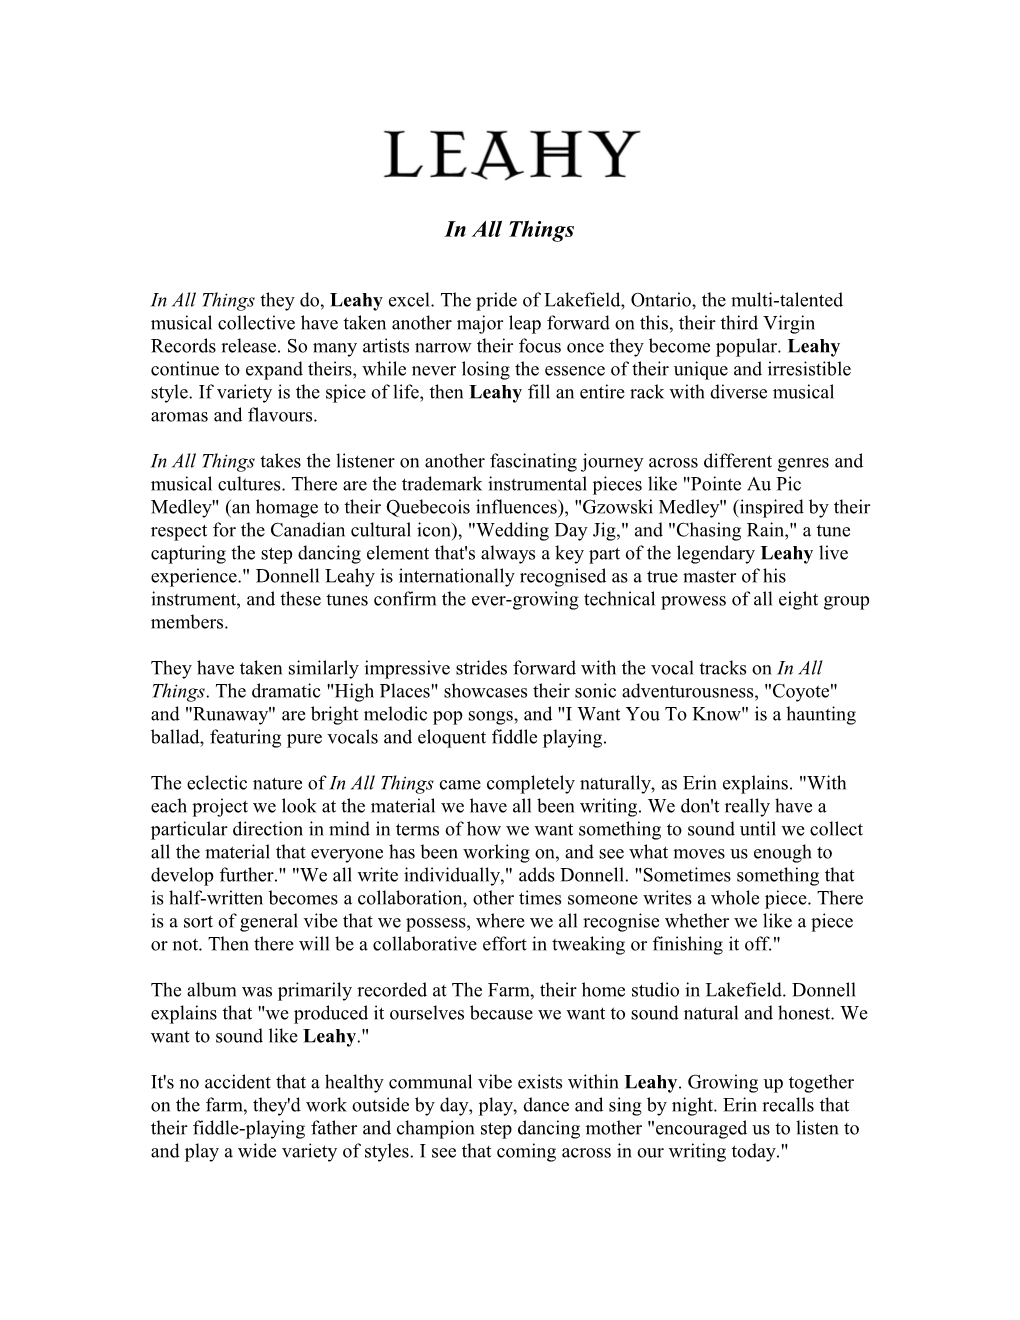 In All Things in All Things They Do, Leahy Excel. the Pride of Lakefield, Ontario, The